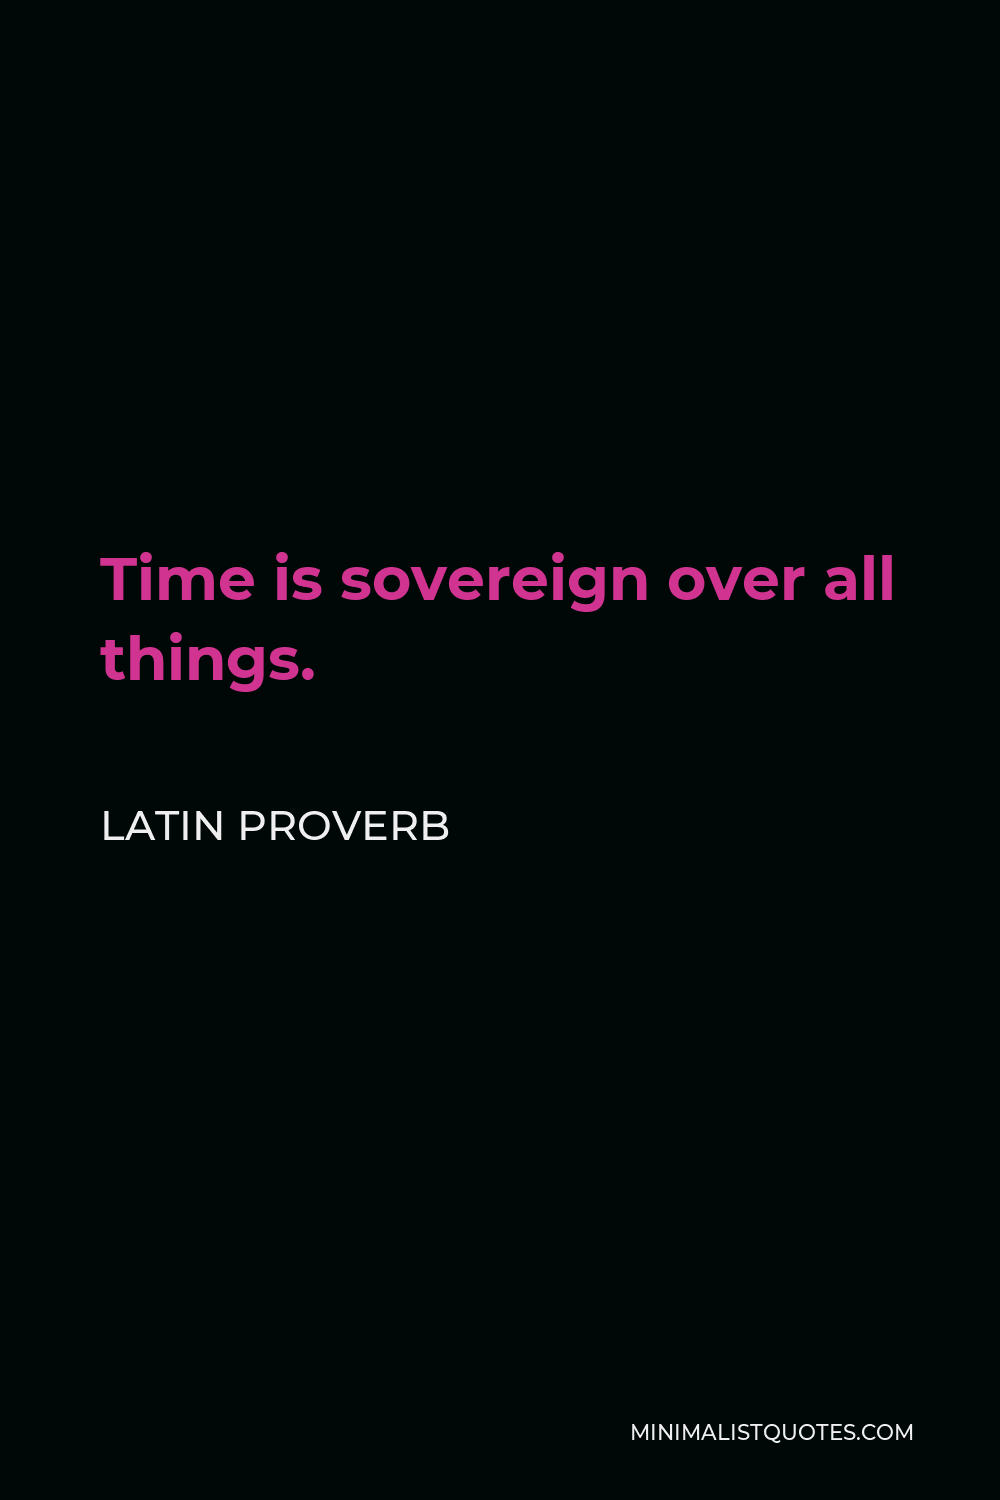 Latin Proverb Quote - Time is sovereign over all things.